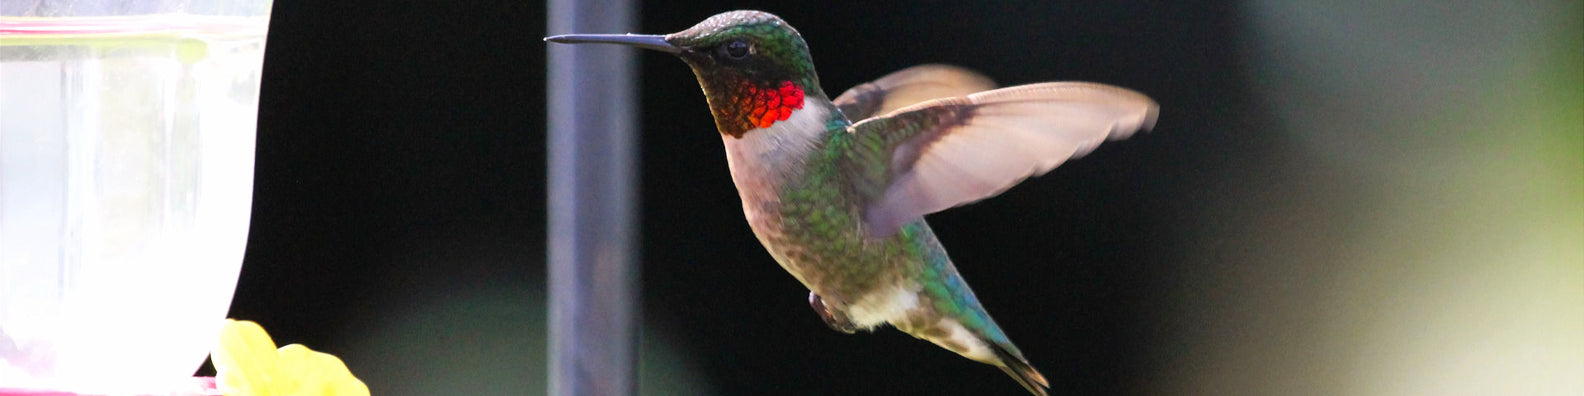 14 Unusual Facts About Hummingbirds